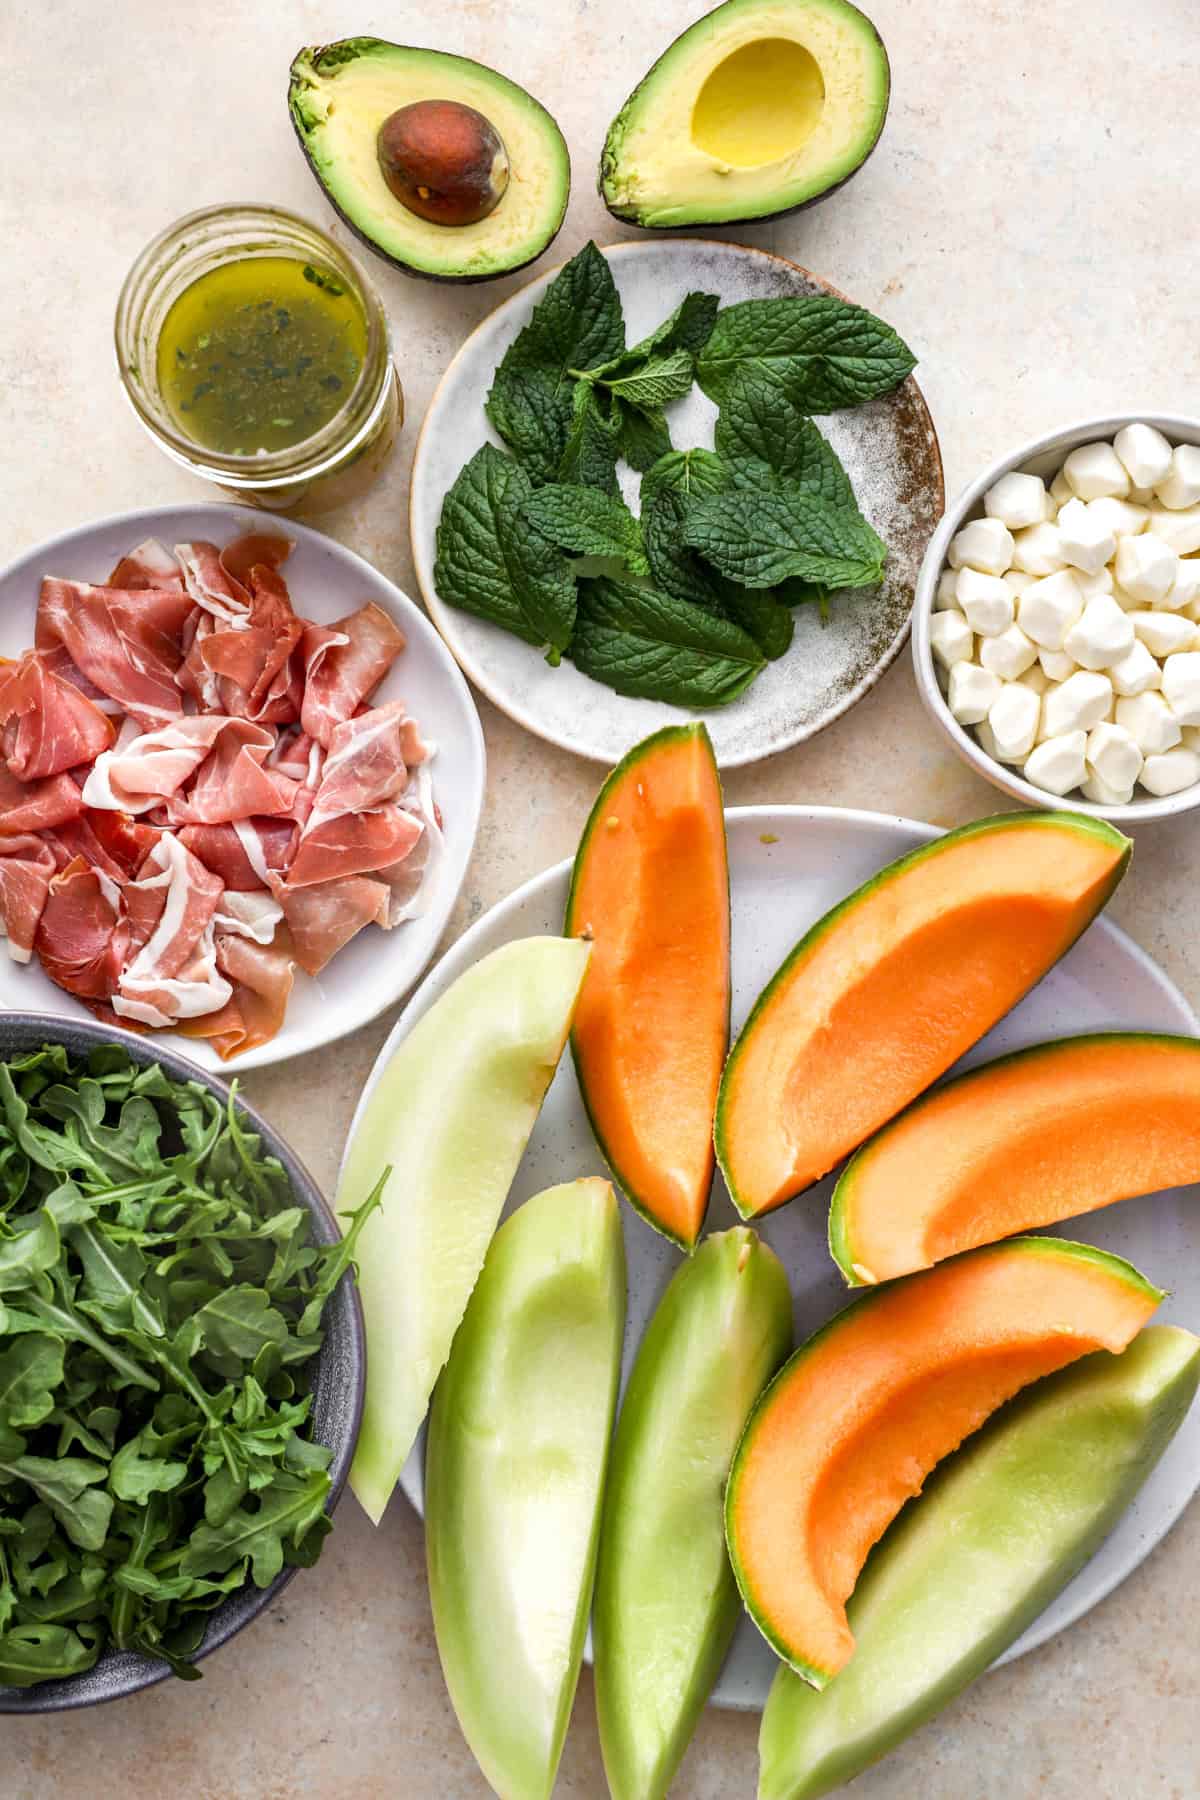 Melon and prosciutto salad ingredients. 